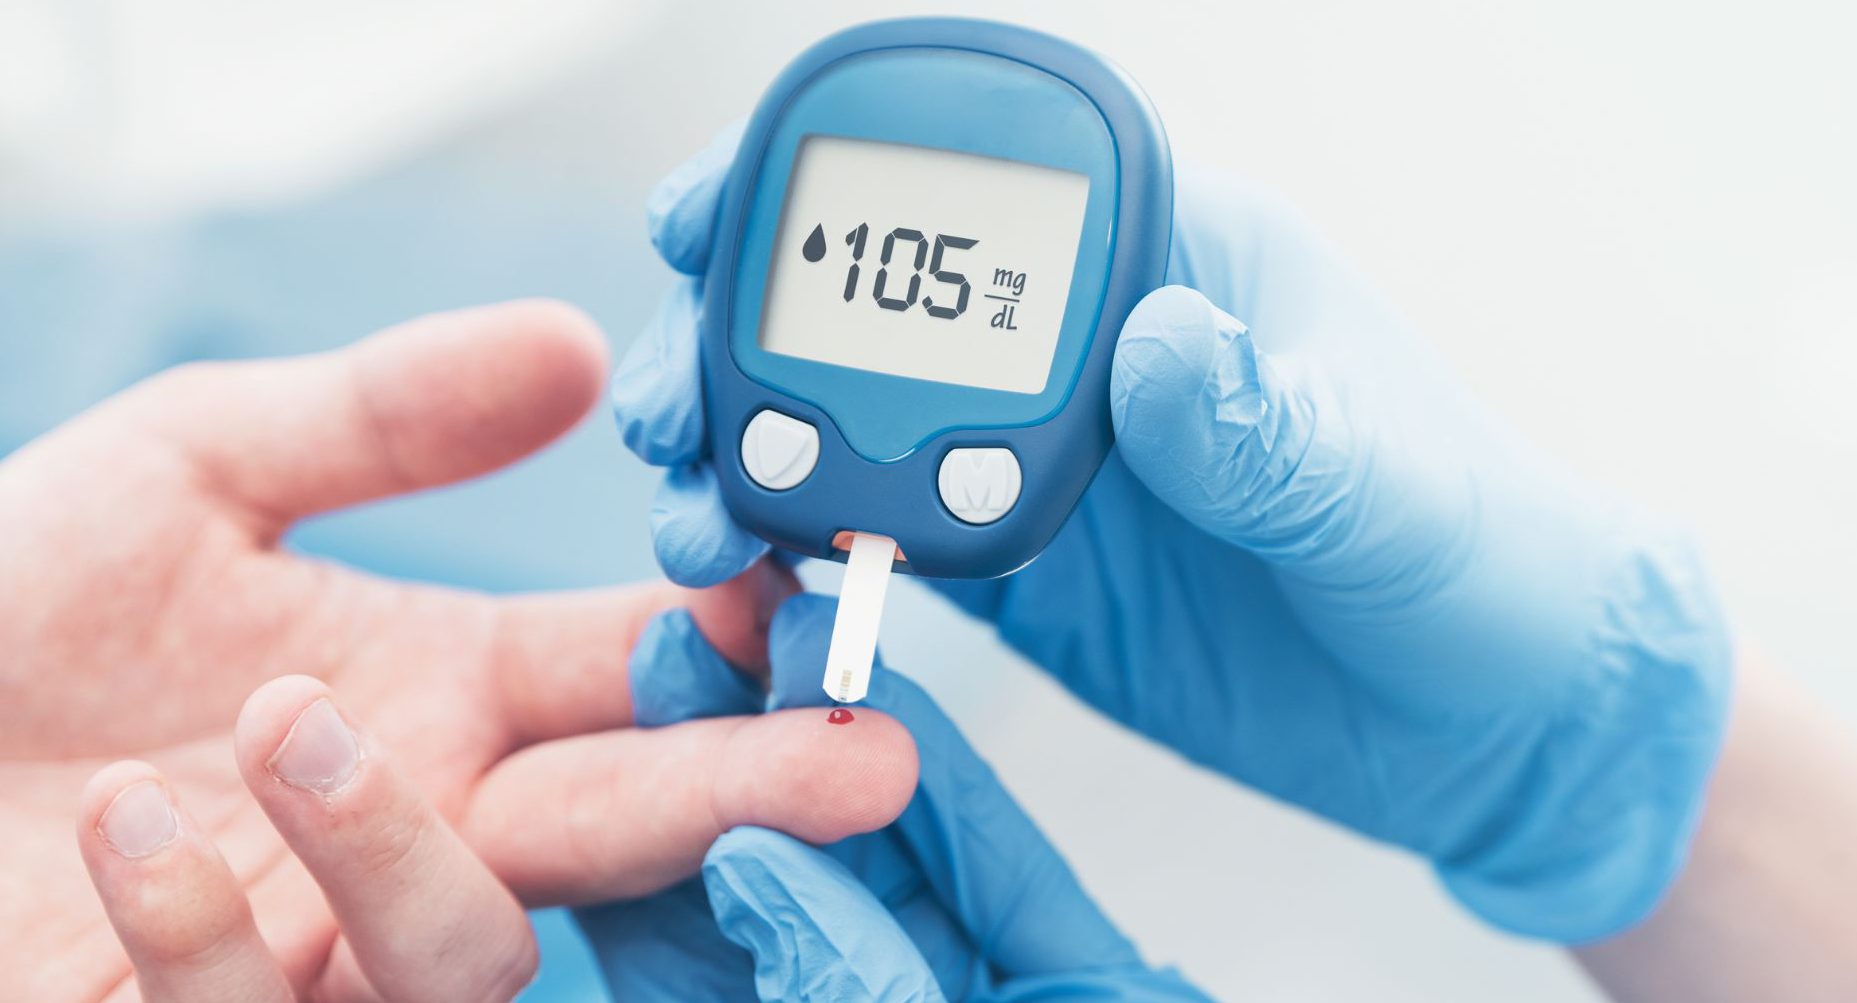 Take Up Global Diabetes Care Devices Market Opportunities With Clear Industry Data – Includes Diabetes Care Devices Market Size